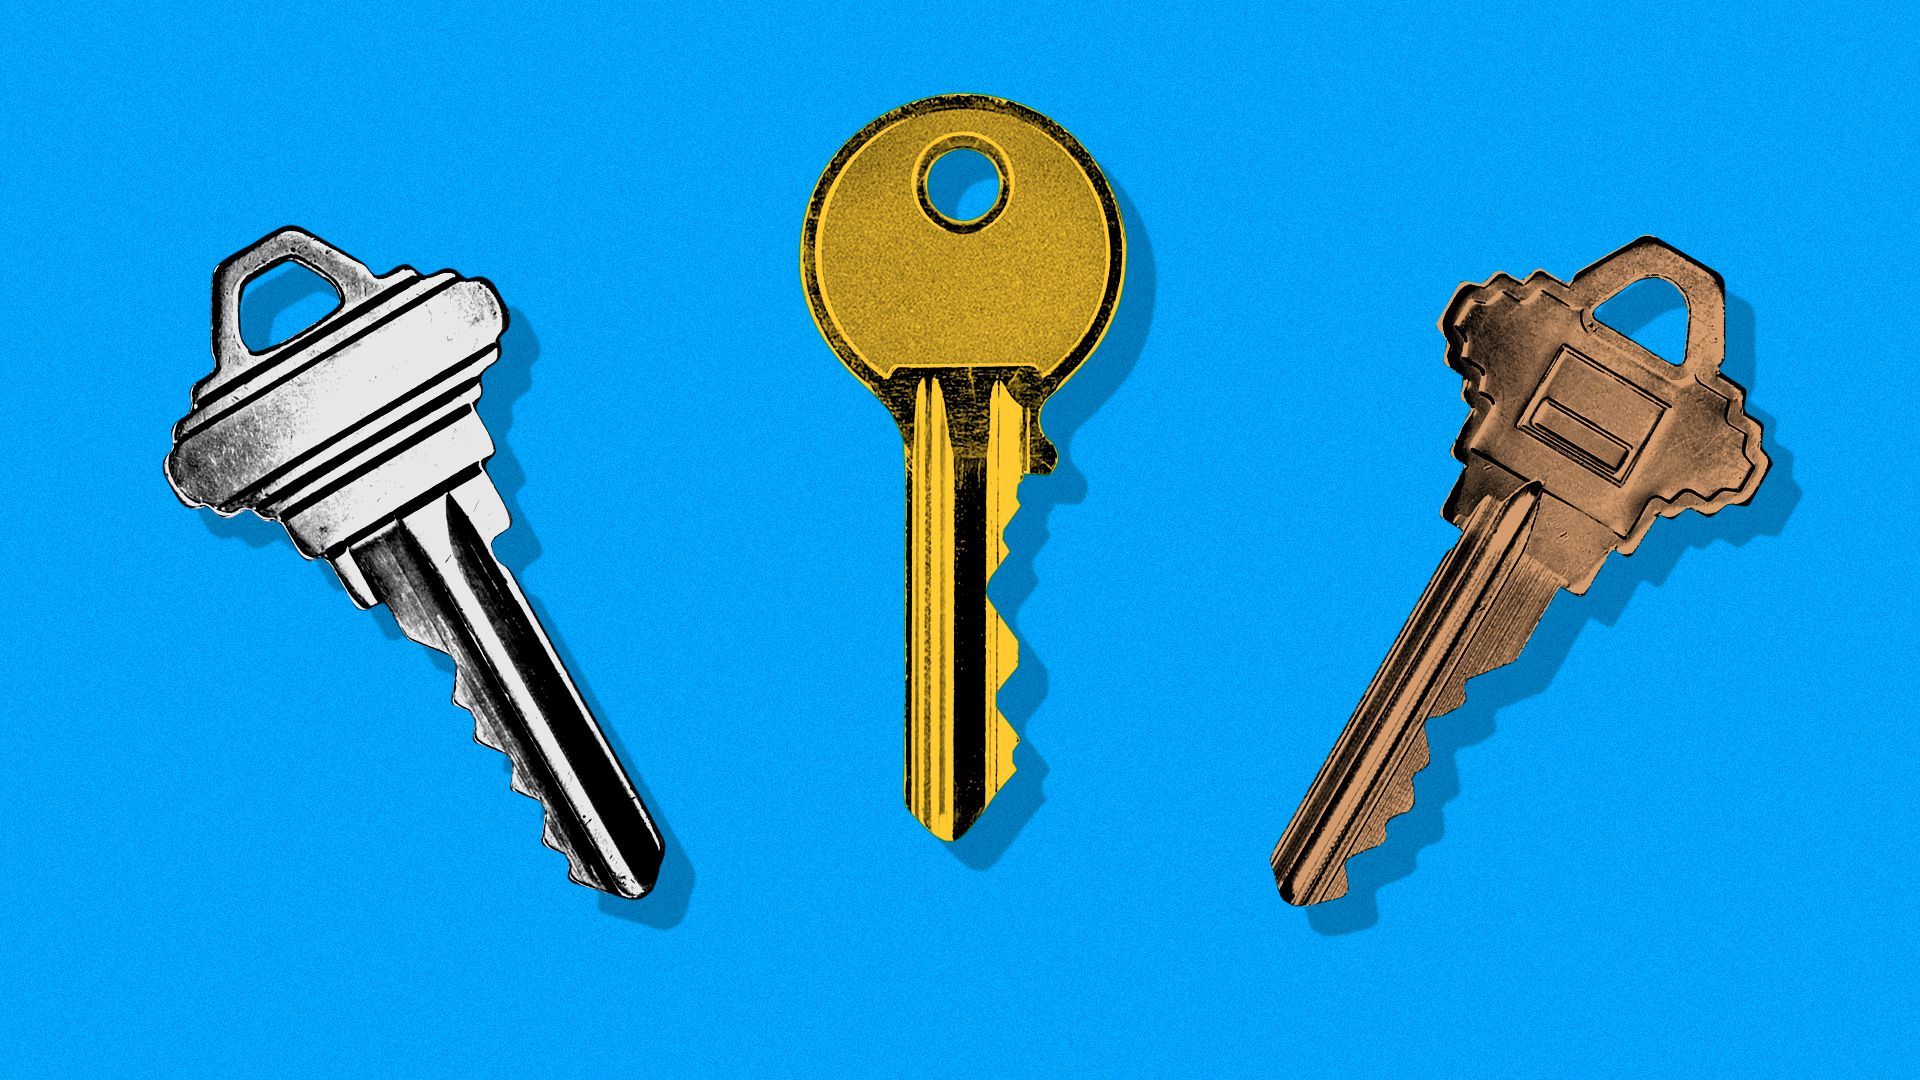 Illustration of three house keys, one silver, one gold, one bronze.